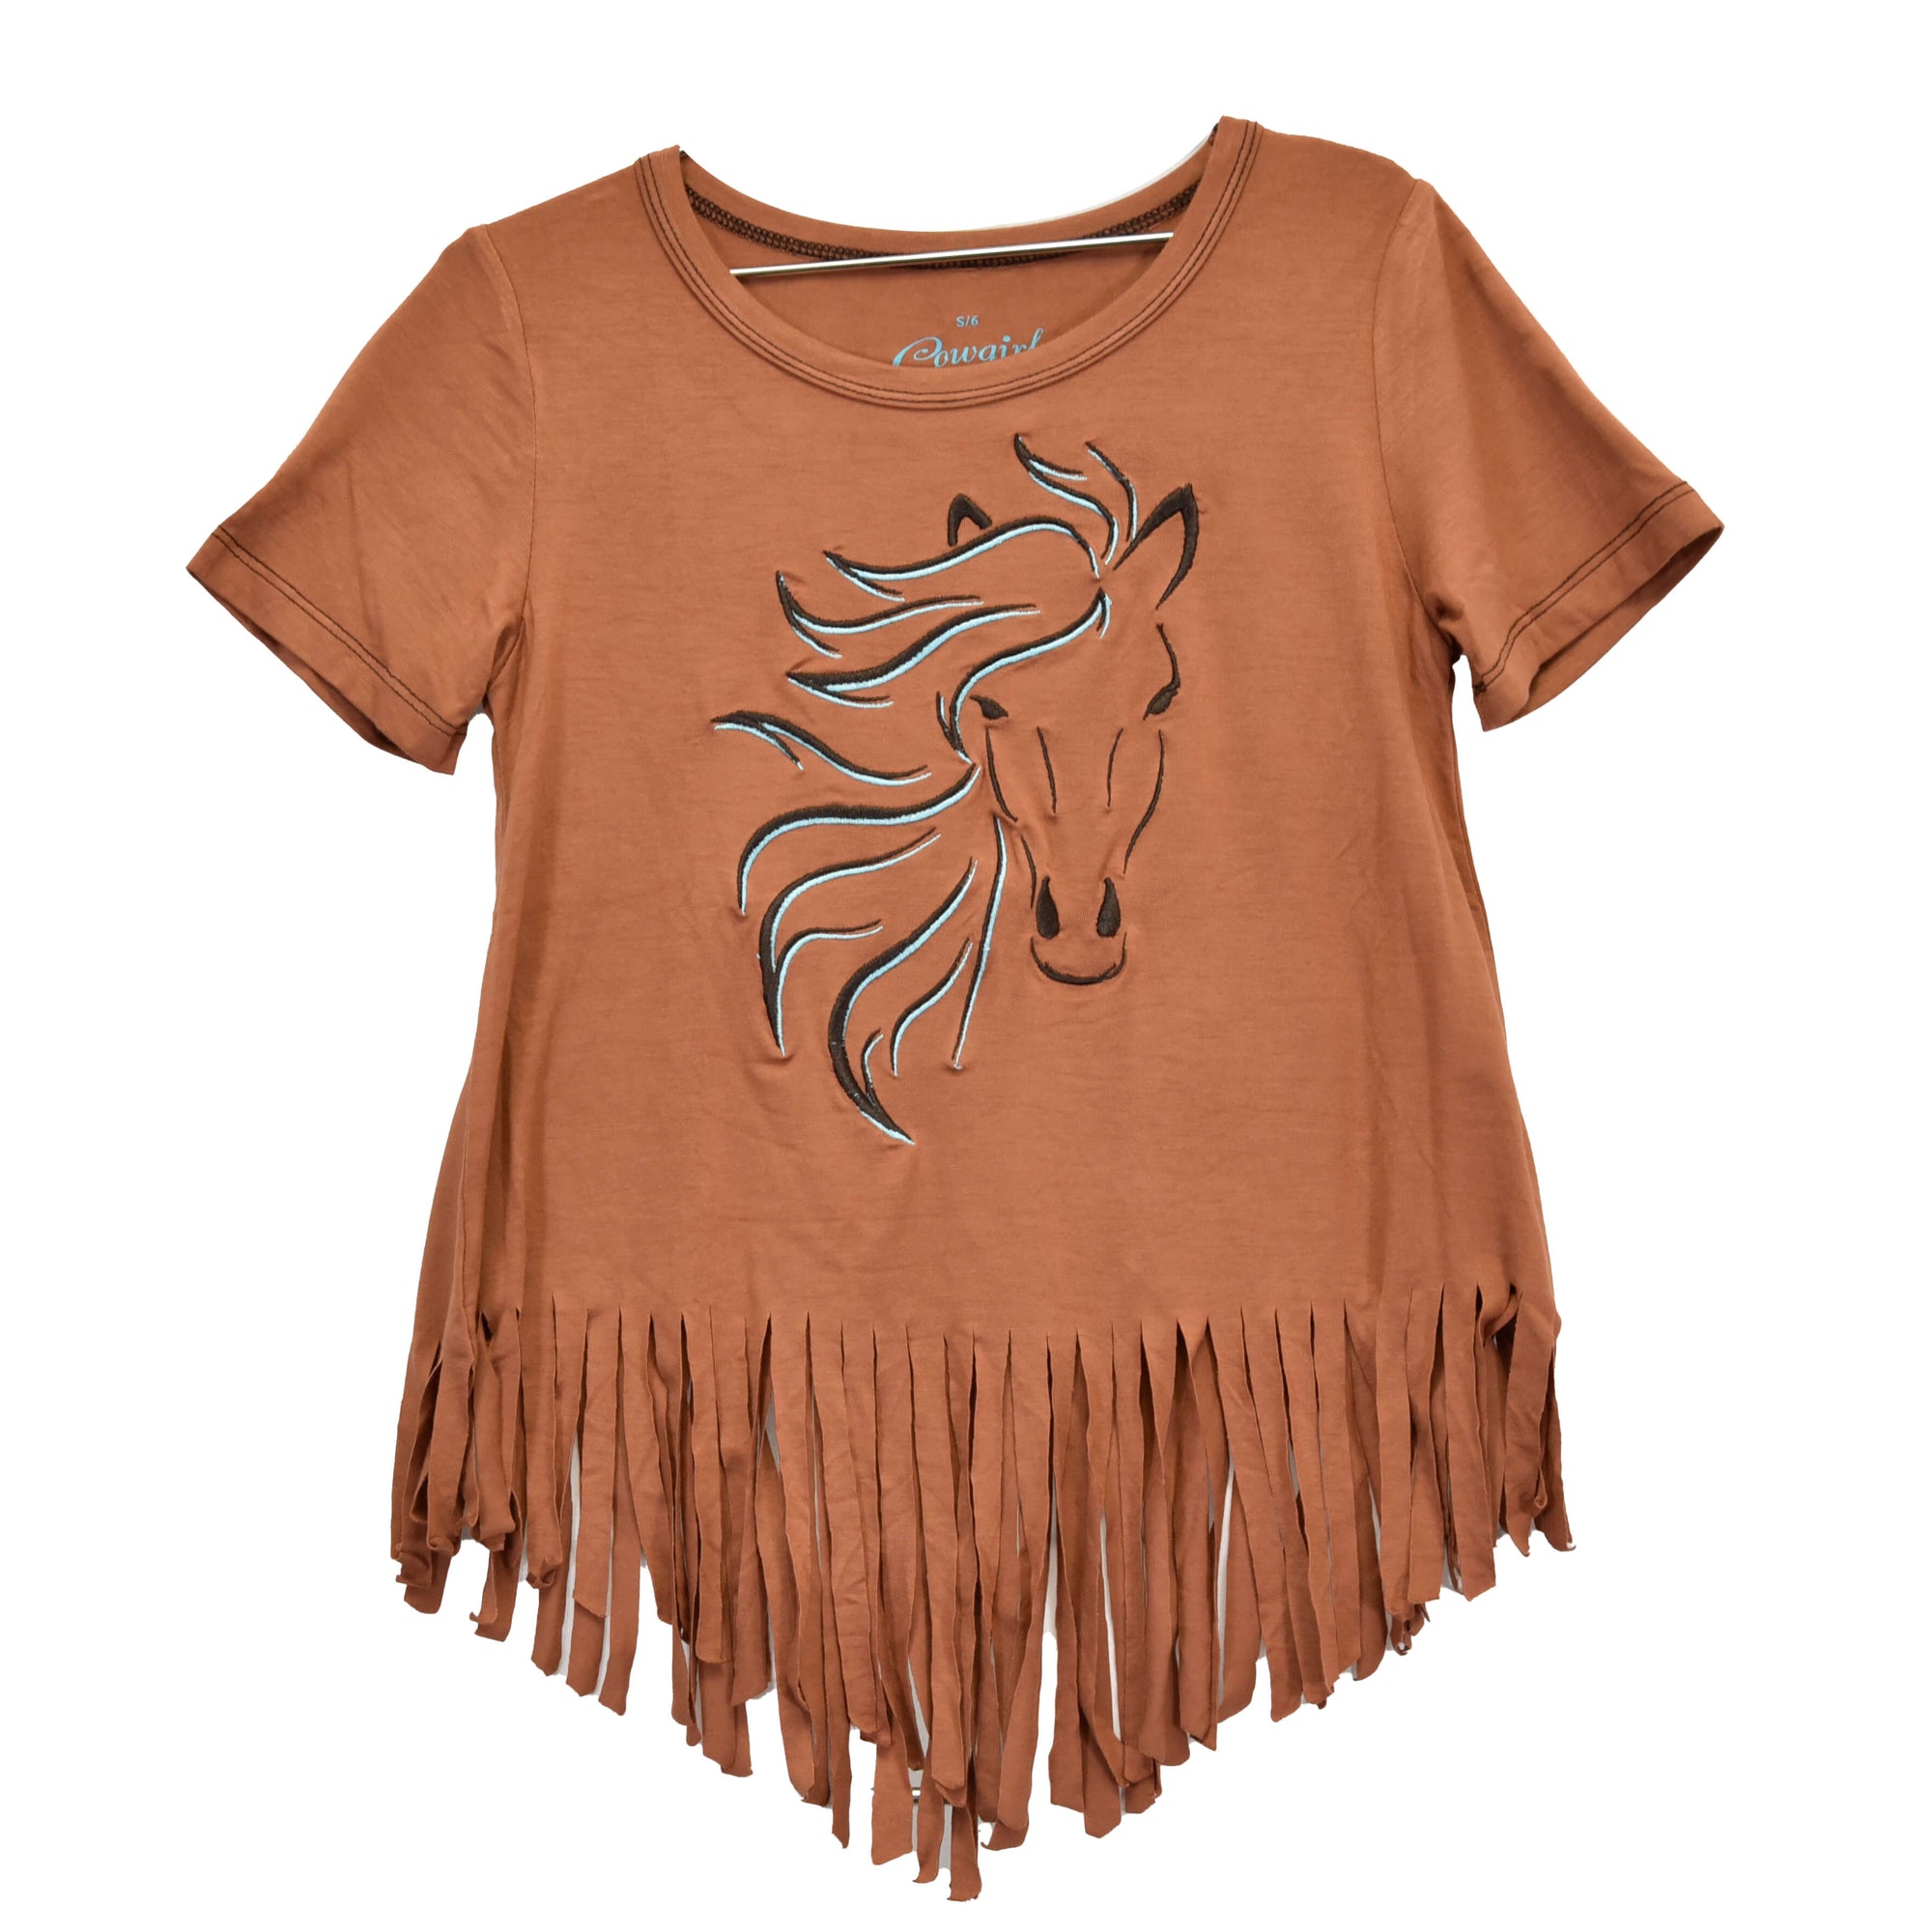 Girl's Cowgirl Hardware Rich Brown Blaze Horse Fringe Short Sleeve Top from Cowboy Hardware